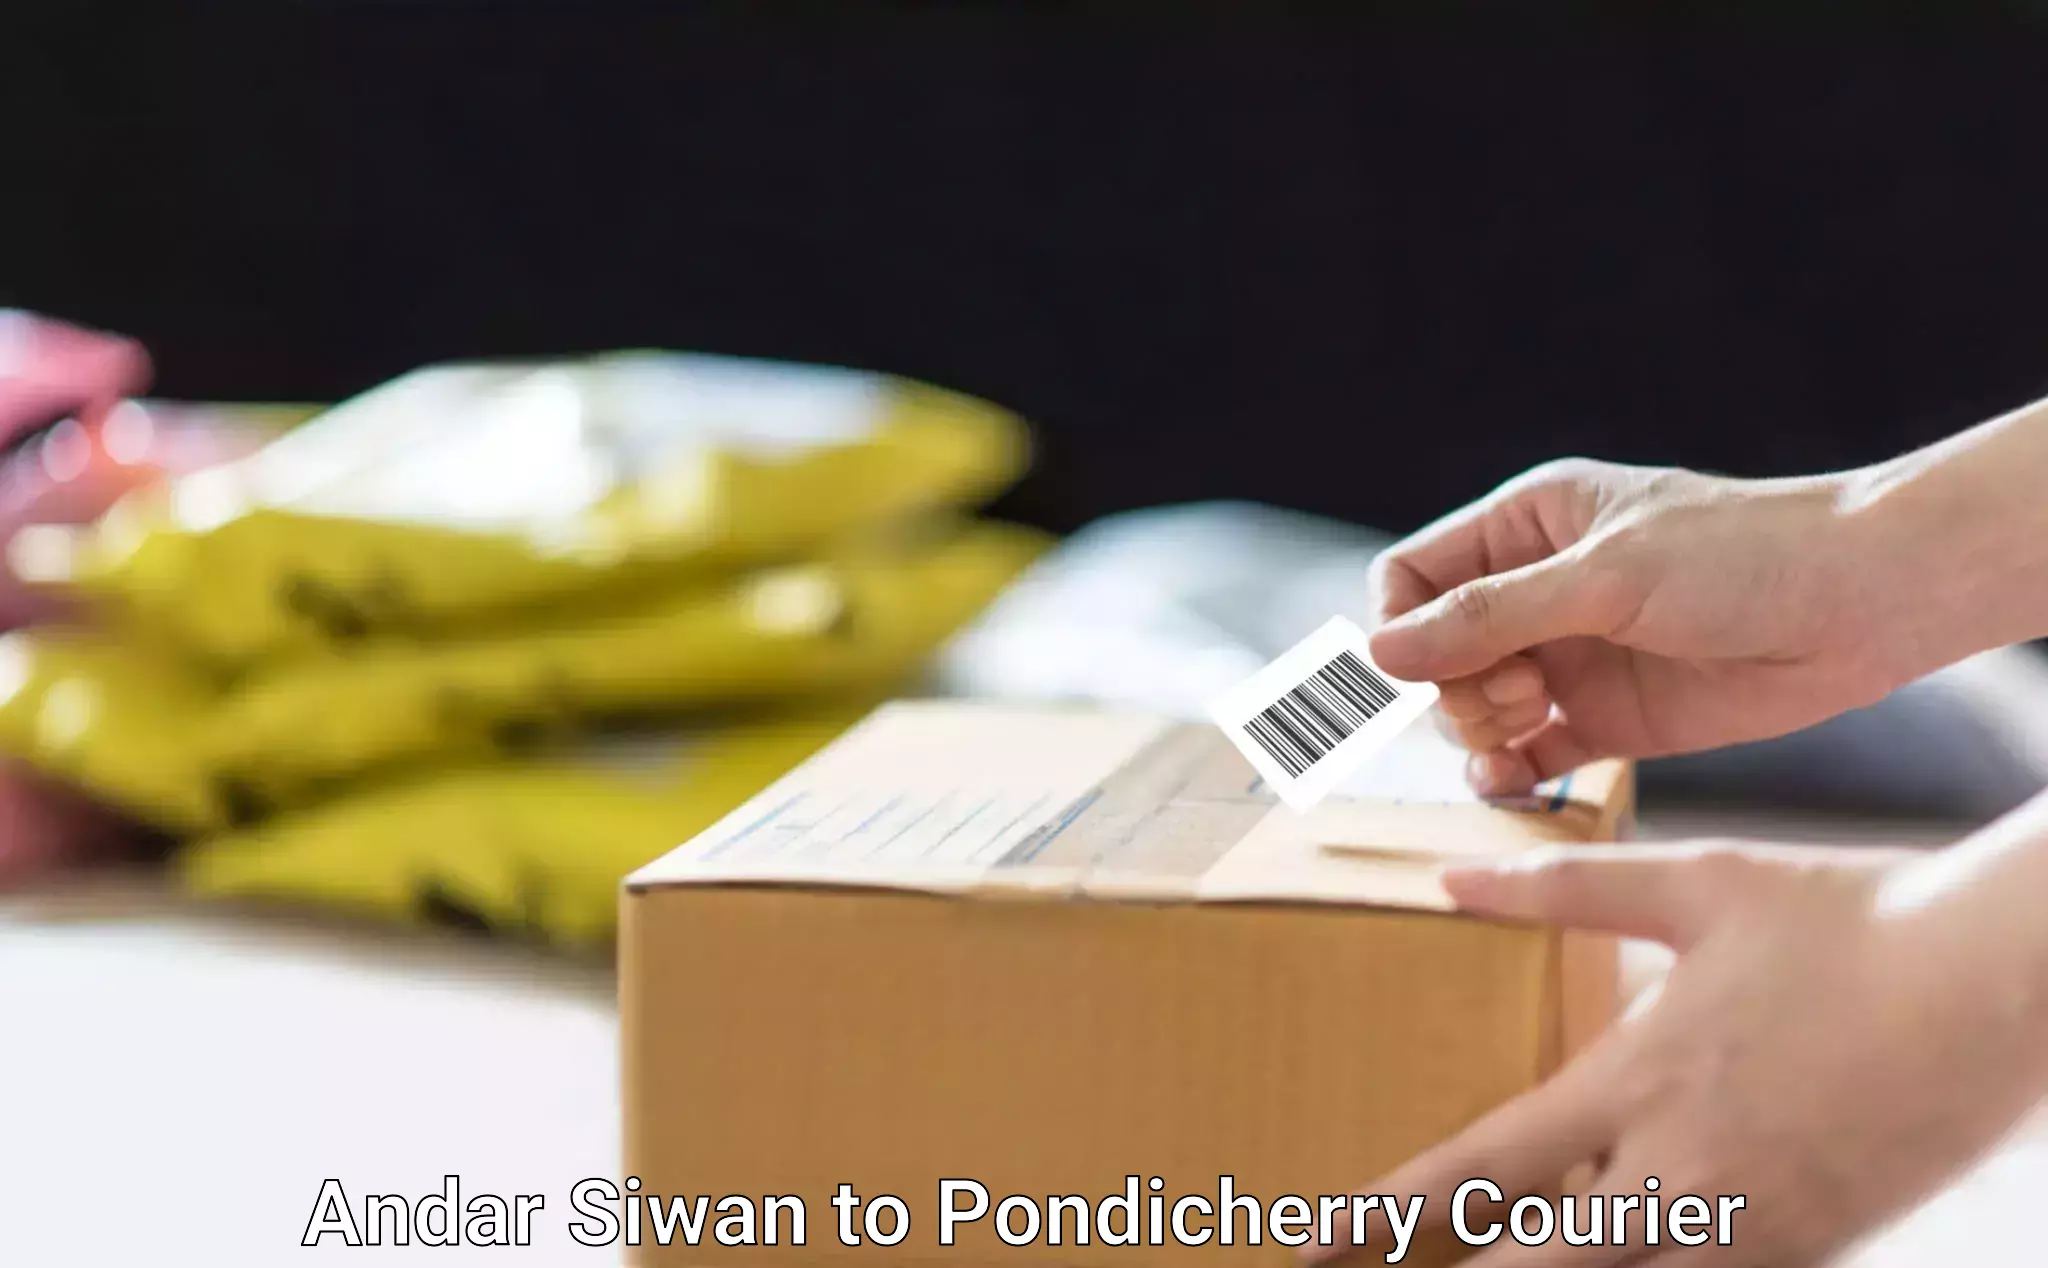 Hassle-free relocation Andar Siwan to Pondicherry University